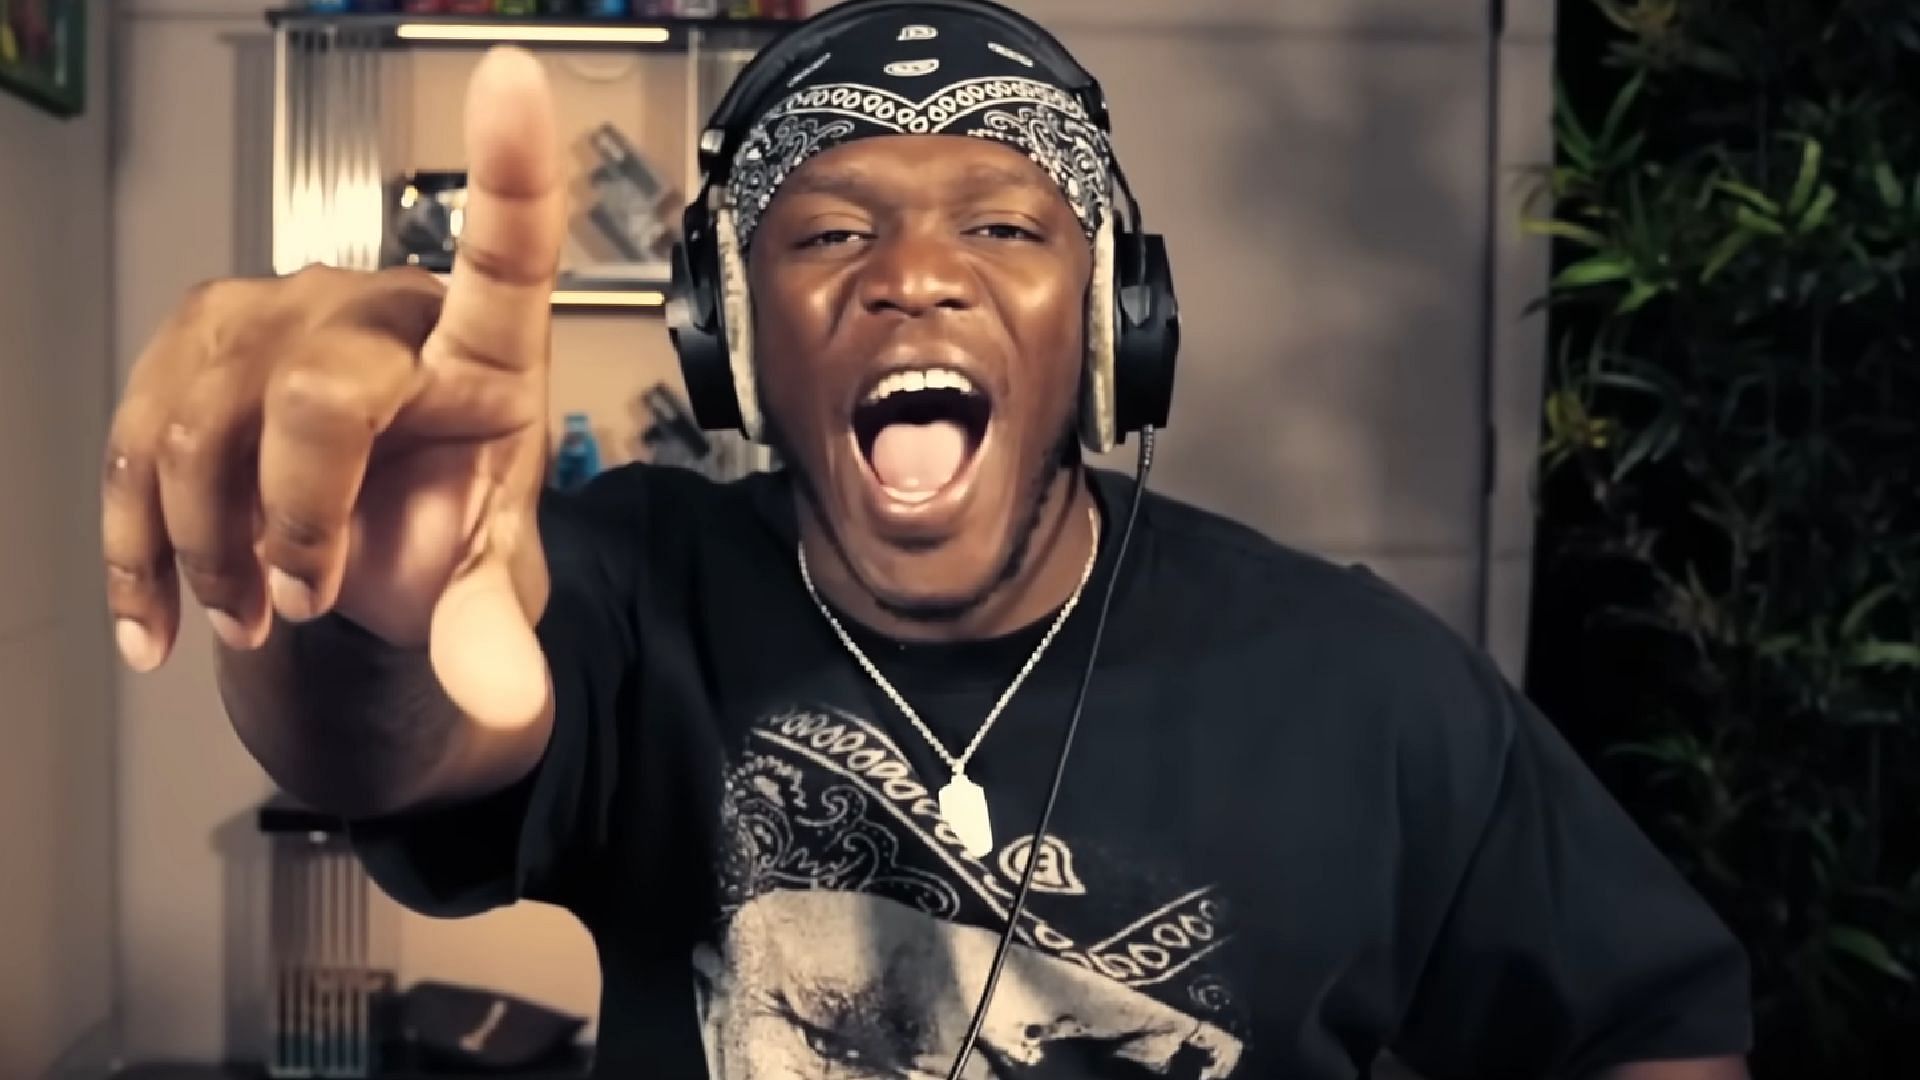 KSI reacts to his main channel getting eclipsed by IShowSpeed (Image via JJ Olatunji/YouTube)